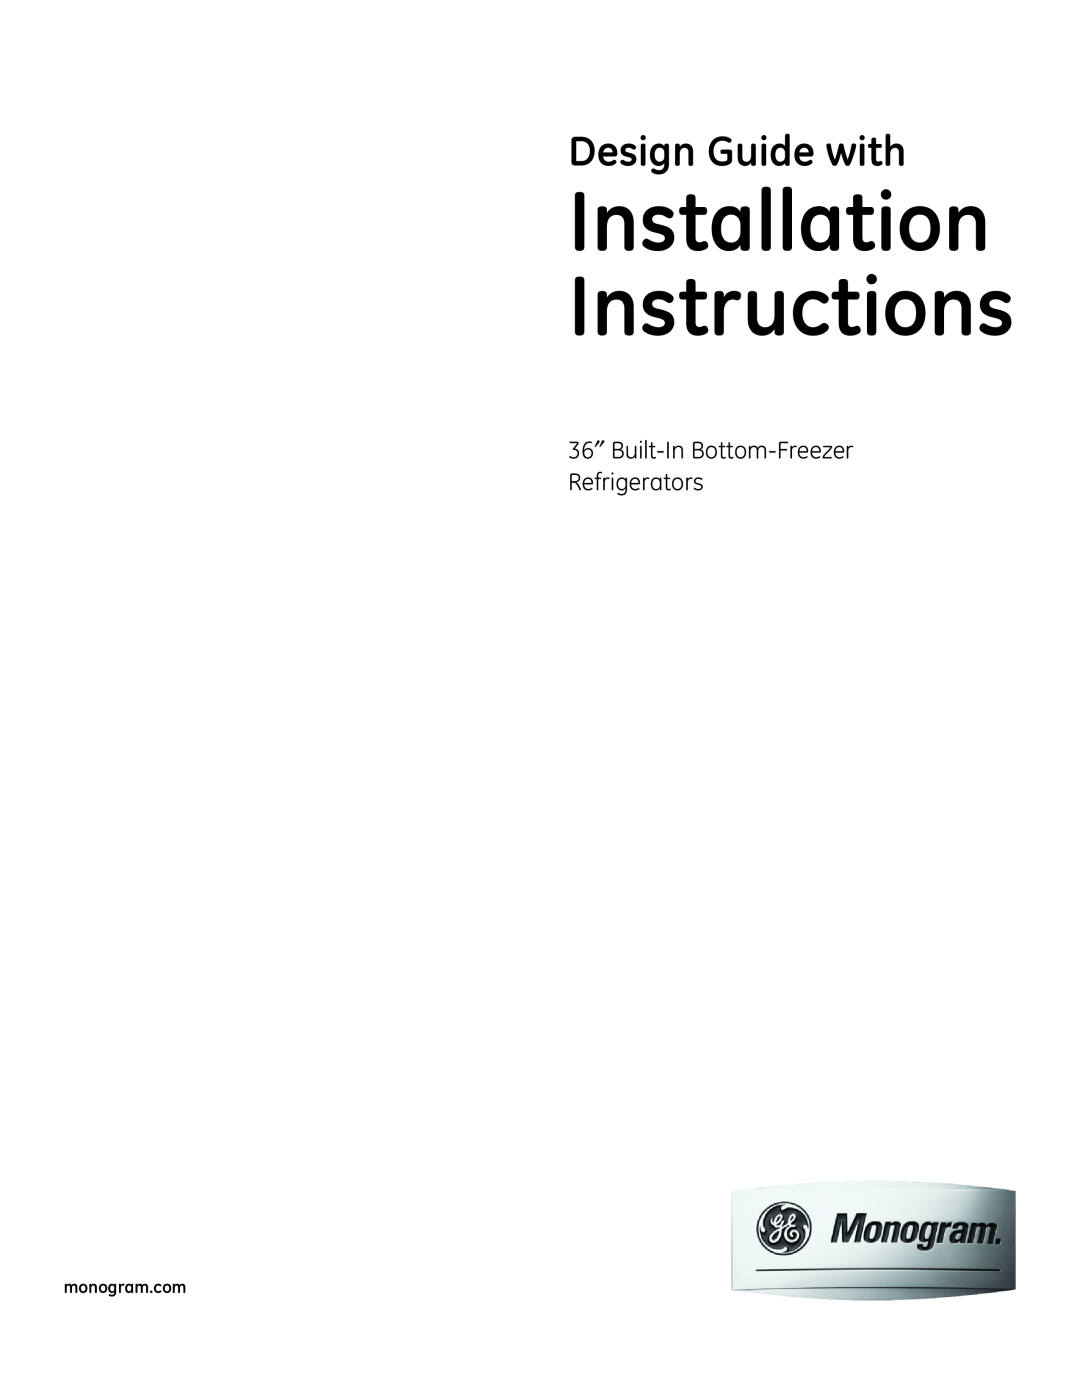 GE 49-60468-1 installation instructions Installation Instructions, Design Guide with 